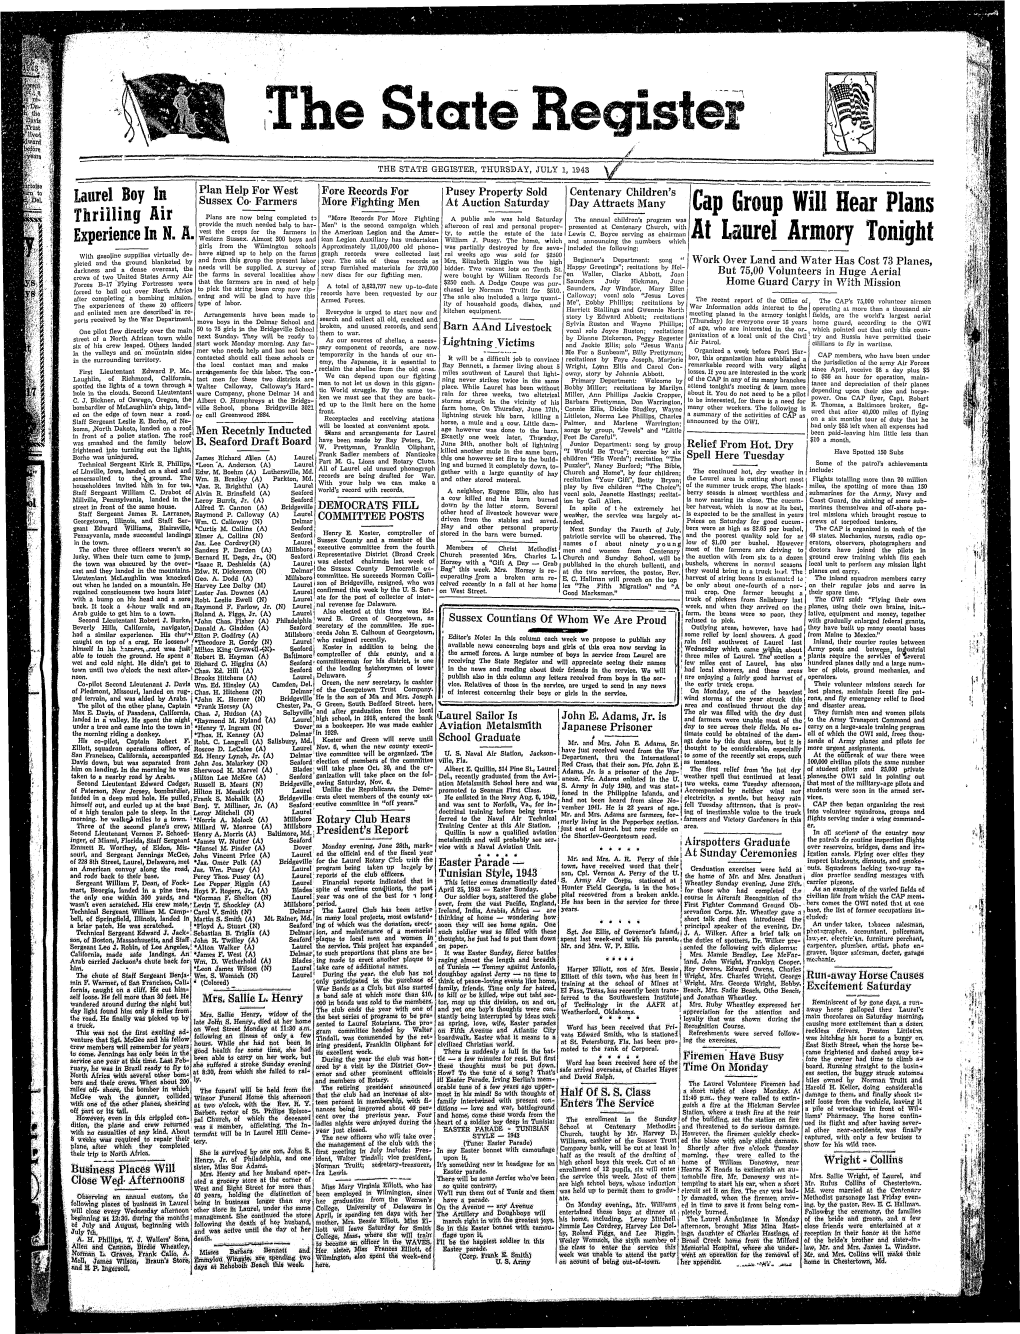 The State Register